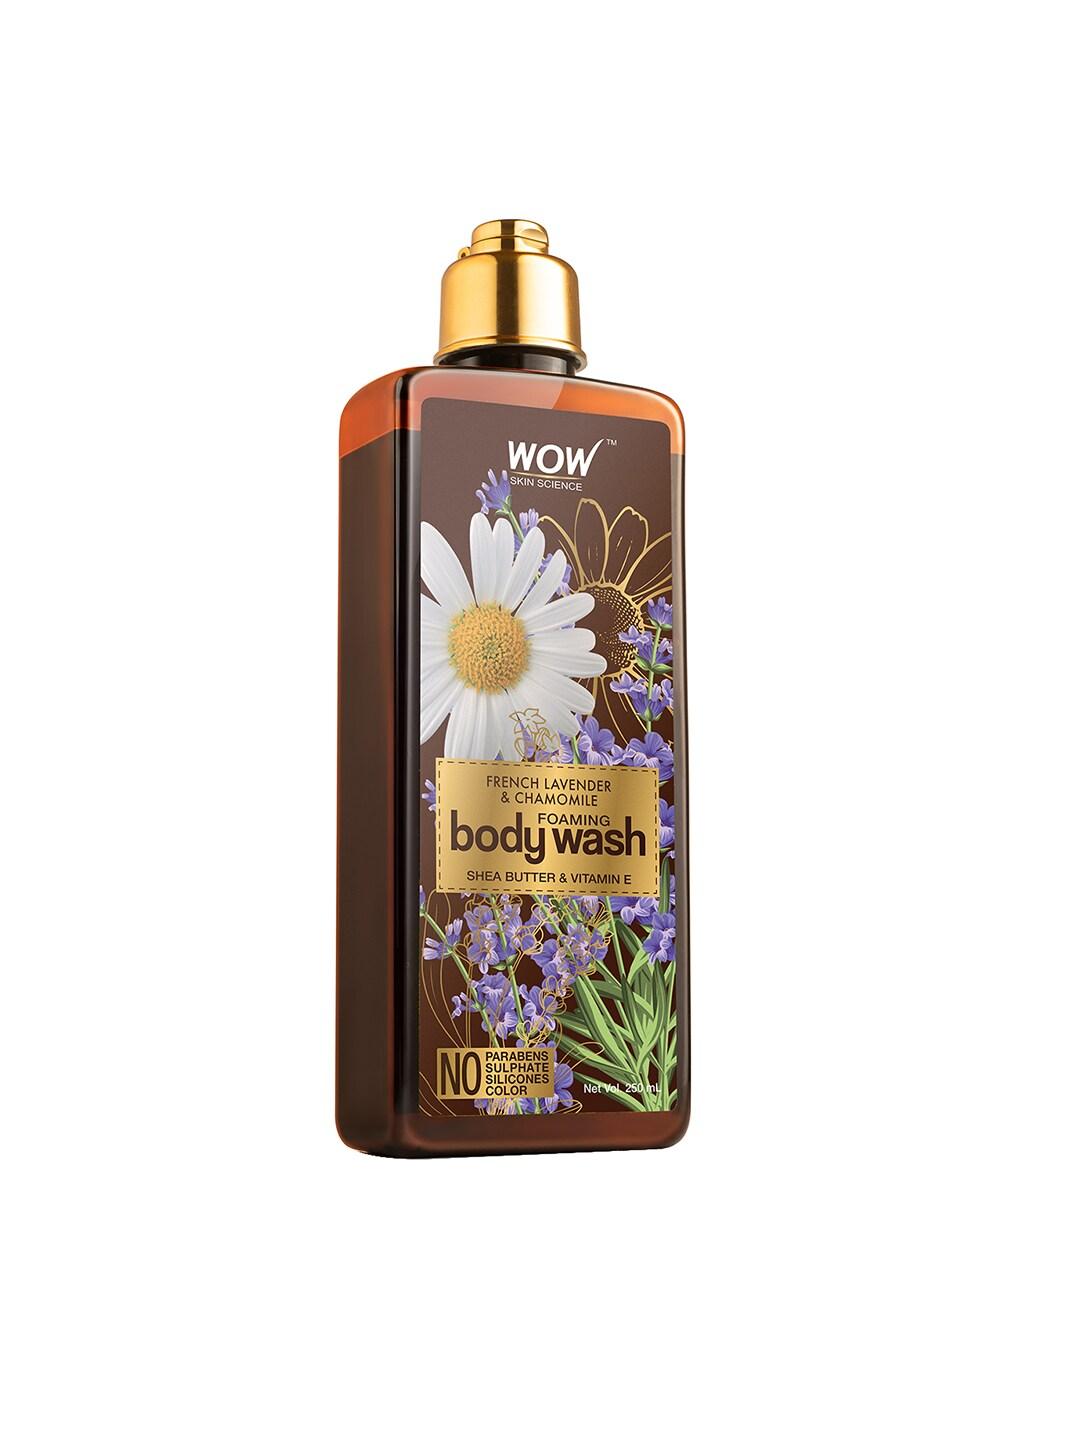 WOW SKIN SCIENCE French Lavender & Chamomile Foaming Body Wash 250 ml